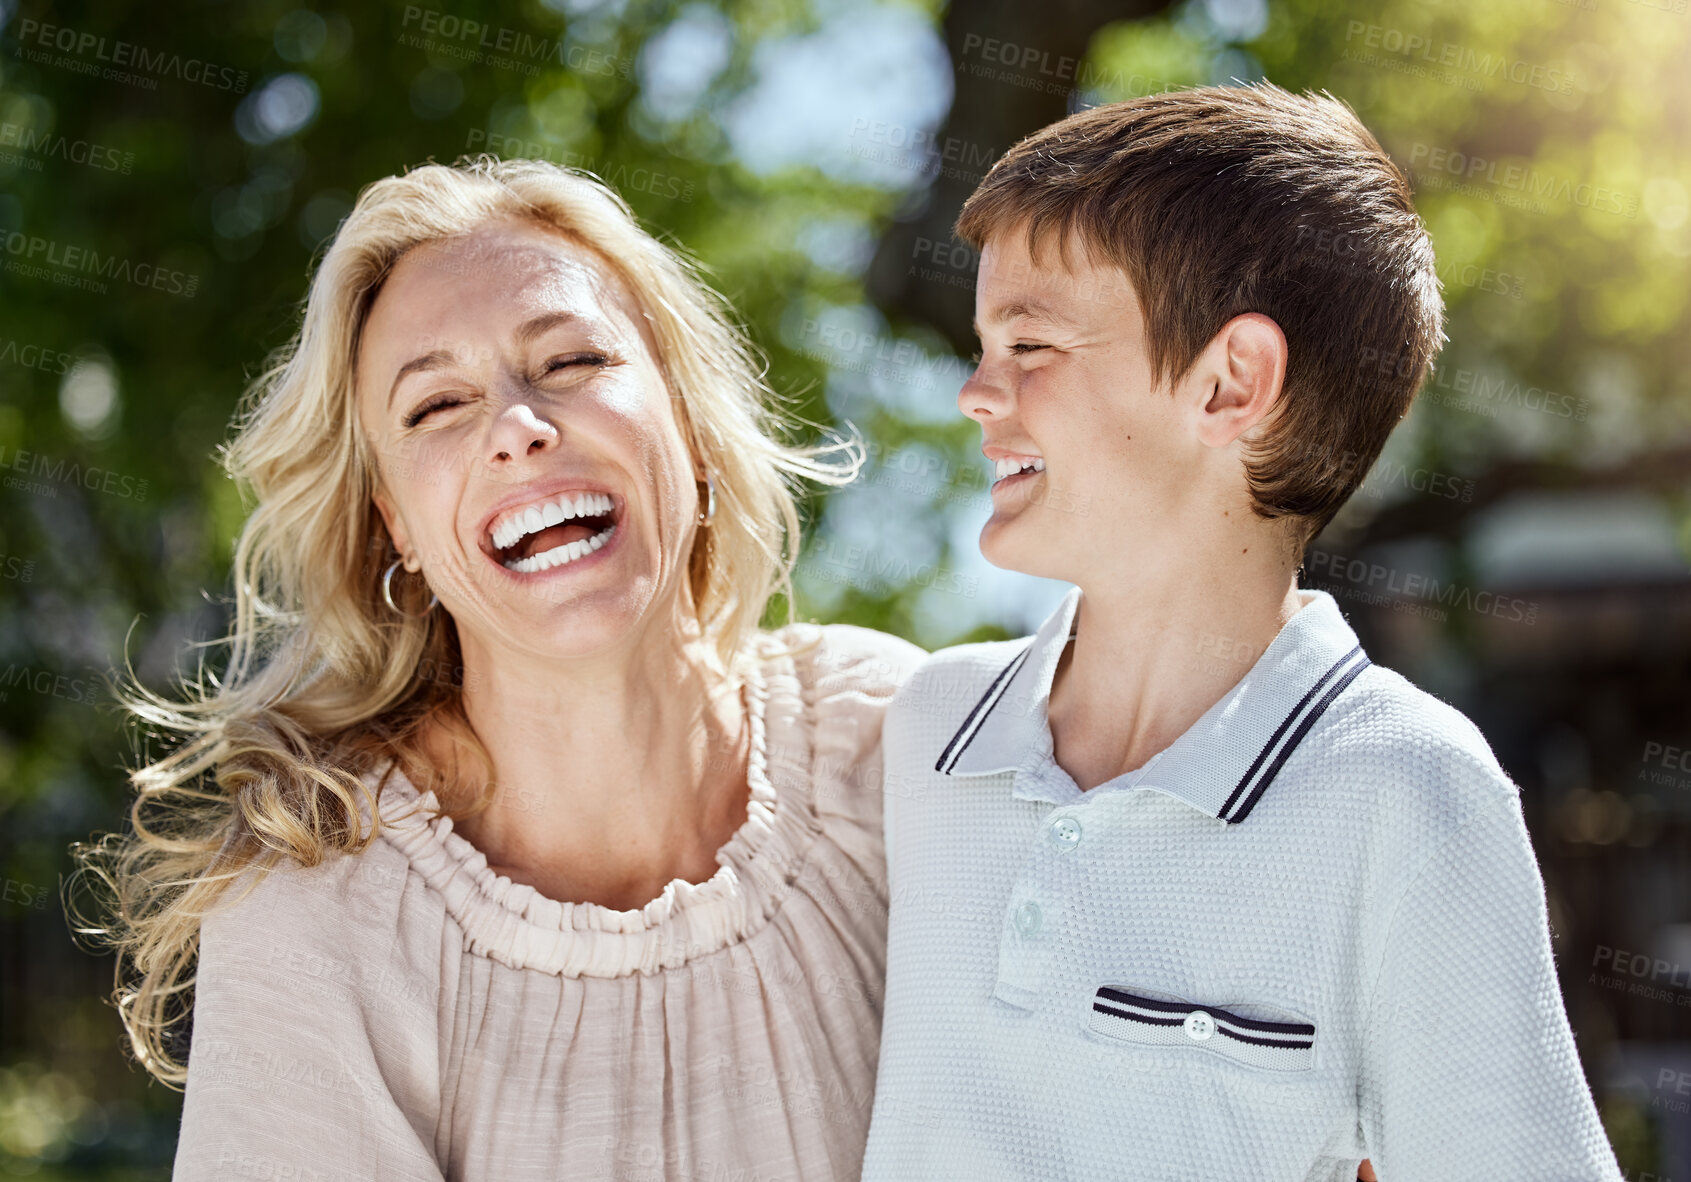 Buy stock photo Shot of a woman spending time outdoors with her young son